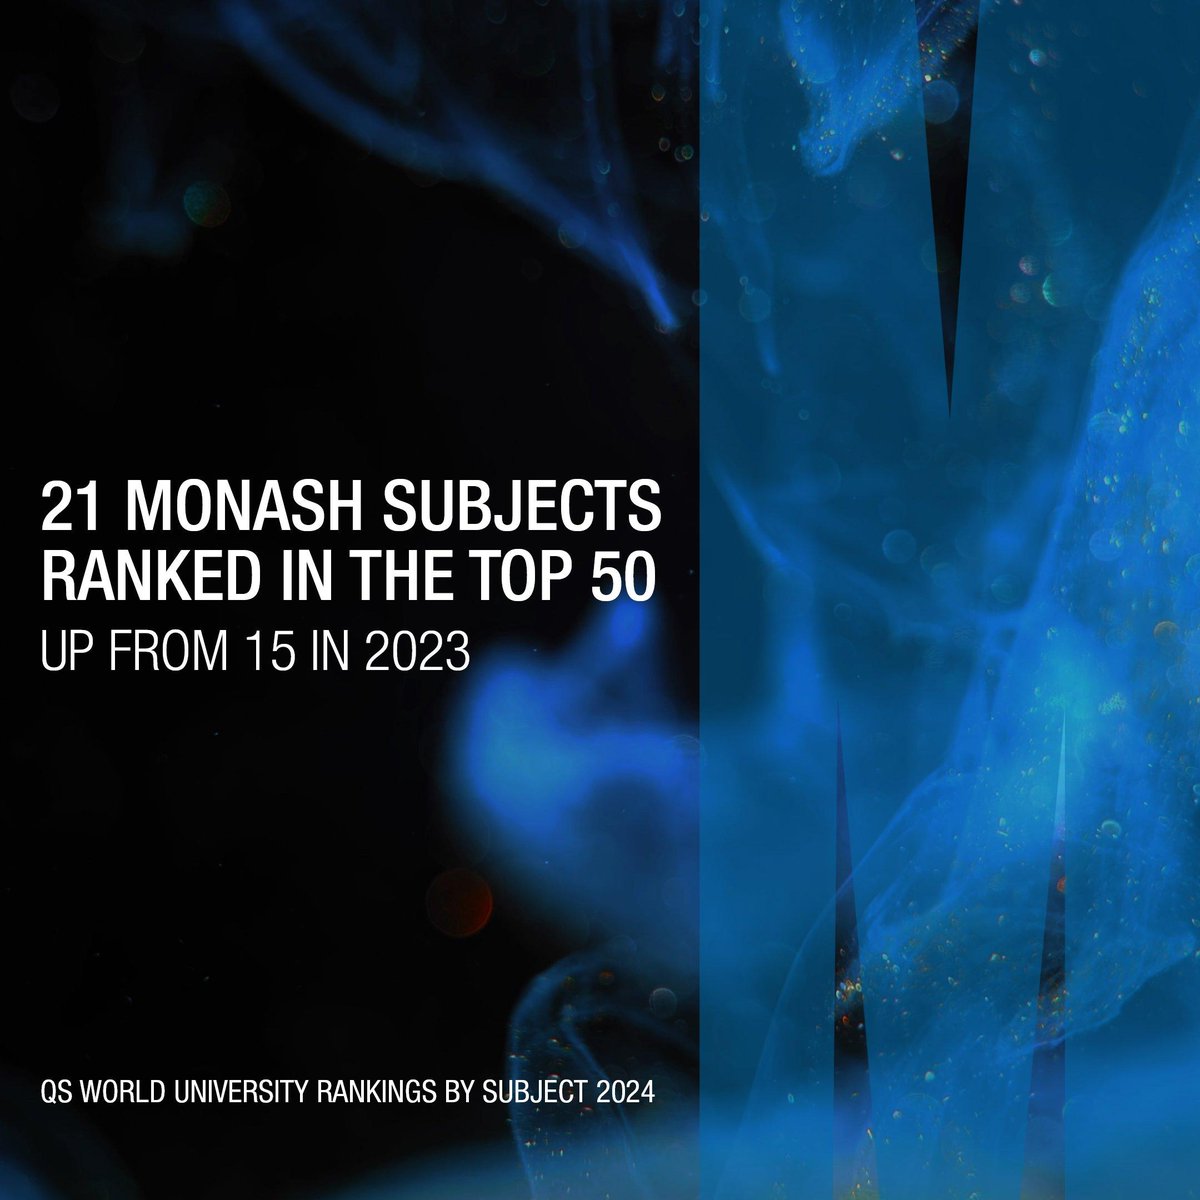 A fantastic result for @monashuni in the QS @worlduniranking by Subject 2024. Congratulations to our staff community, who continue to position Monash as a global top-50 university through our excellent education, research and graduate employability. ow.ly/qiaA30sBw5J